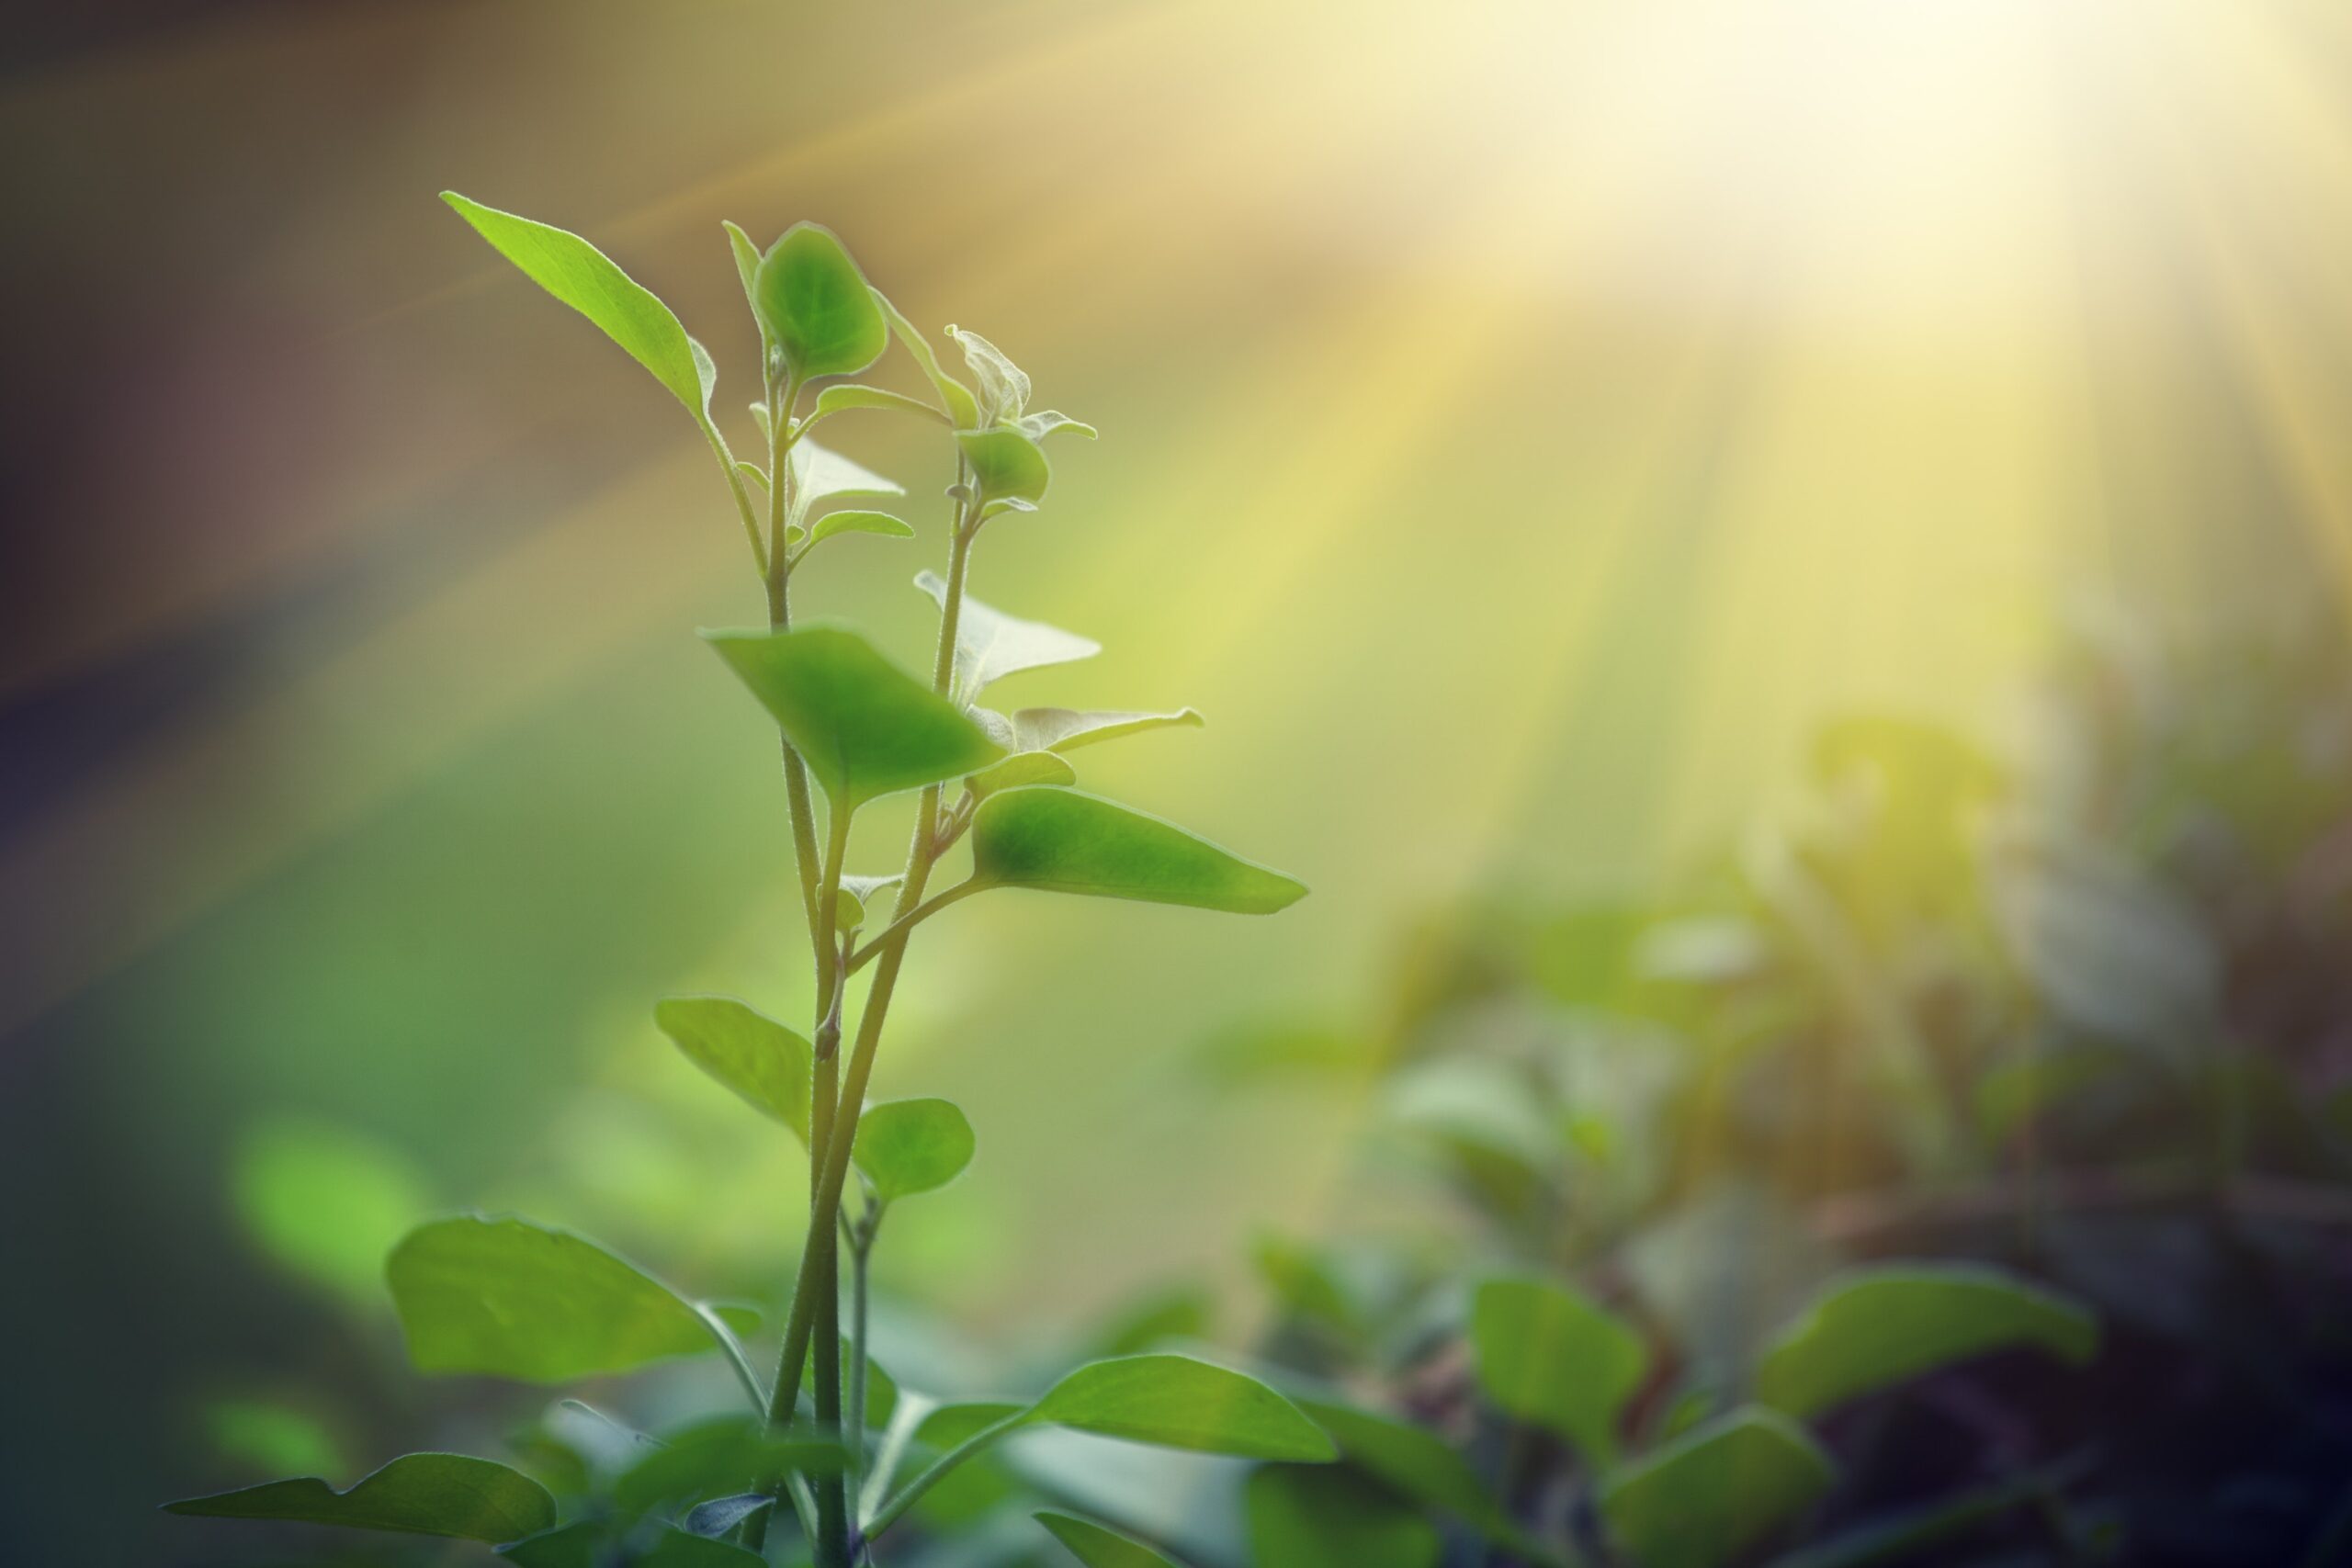 62 million for improved photosynthesis